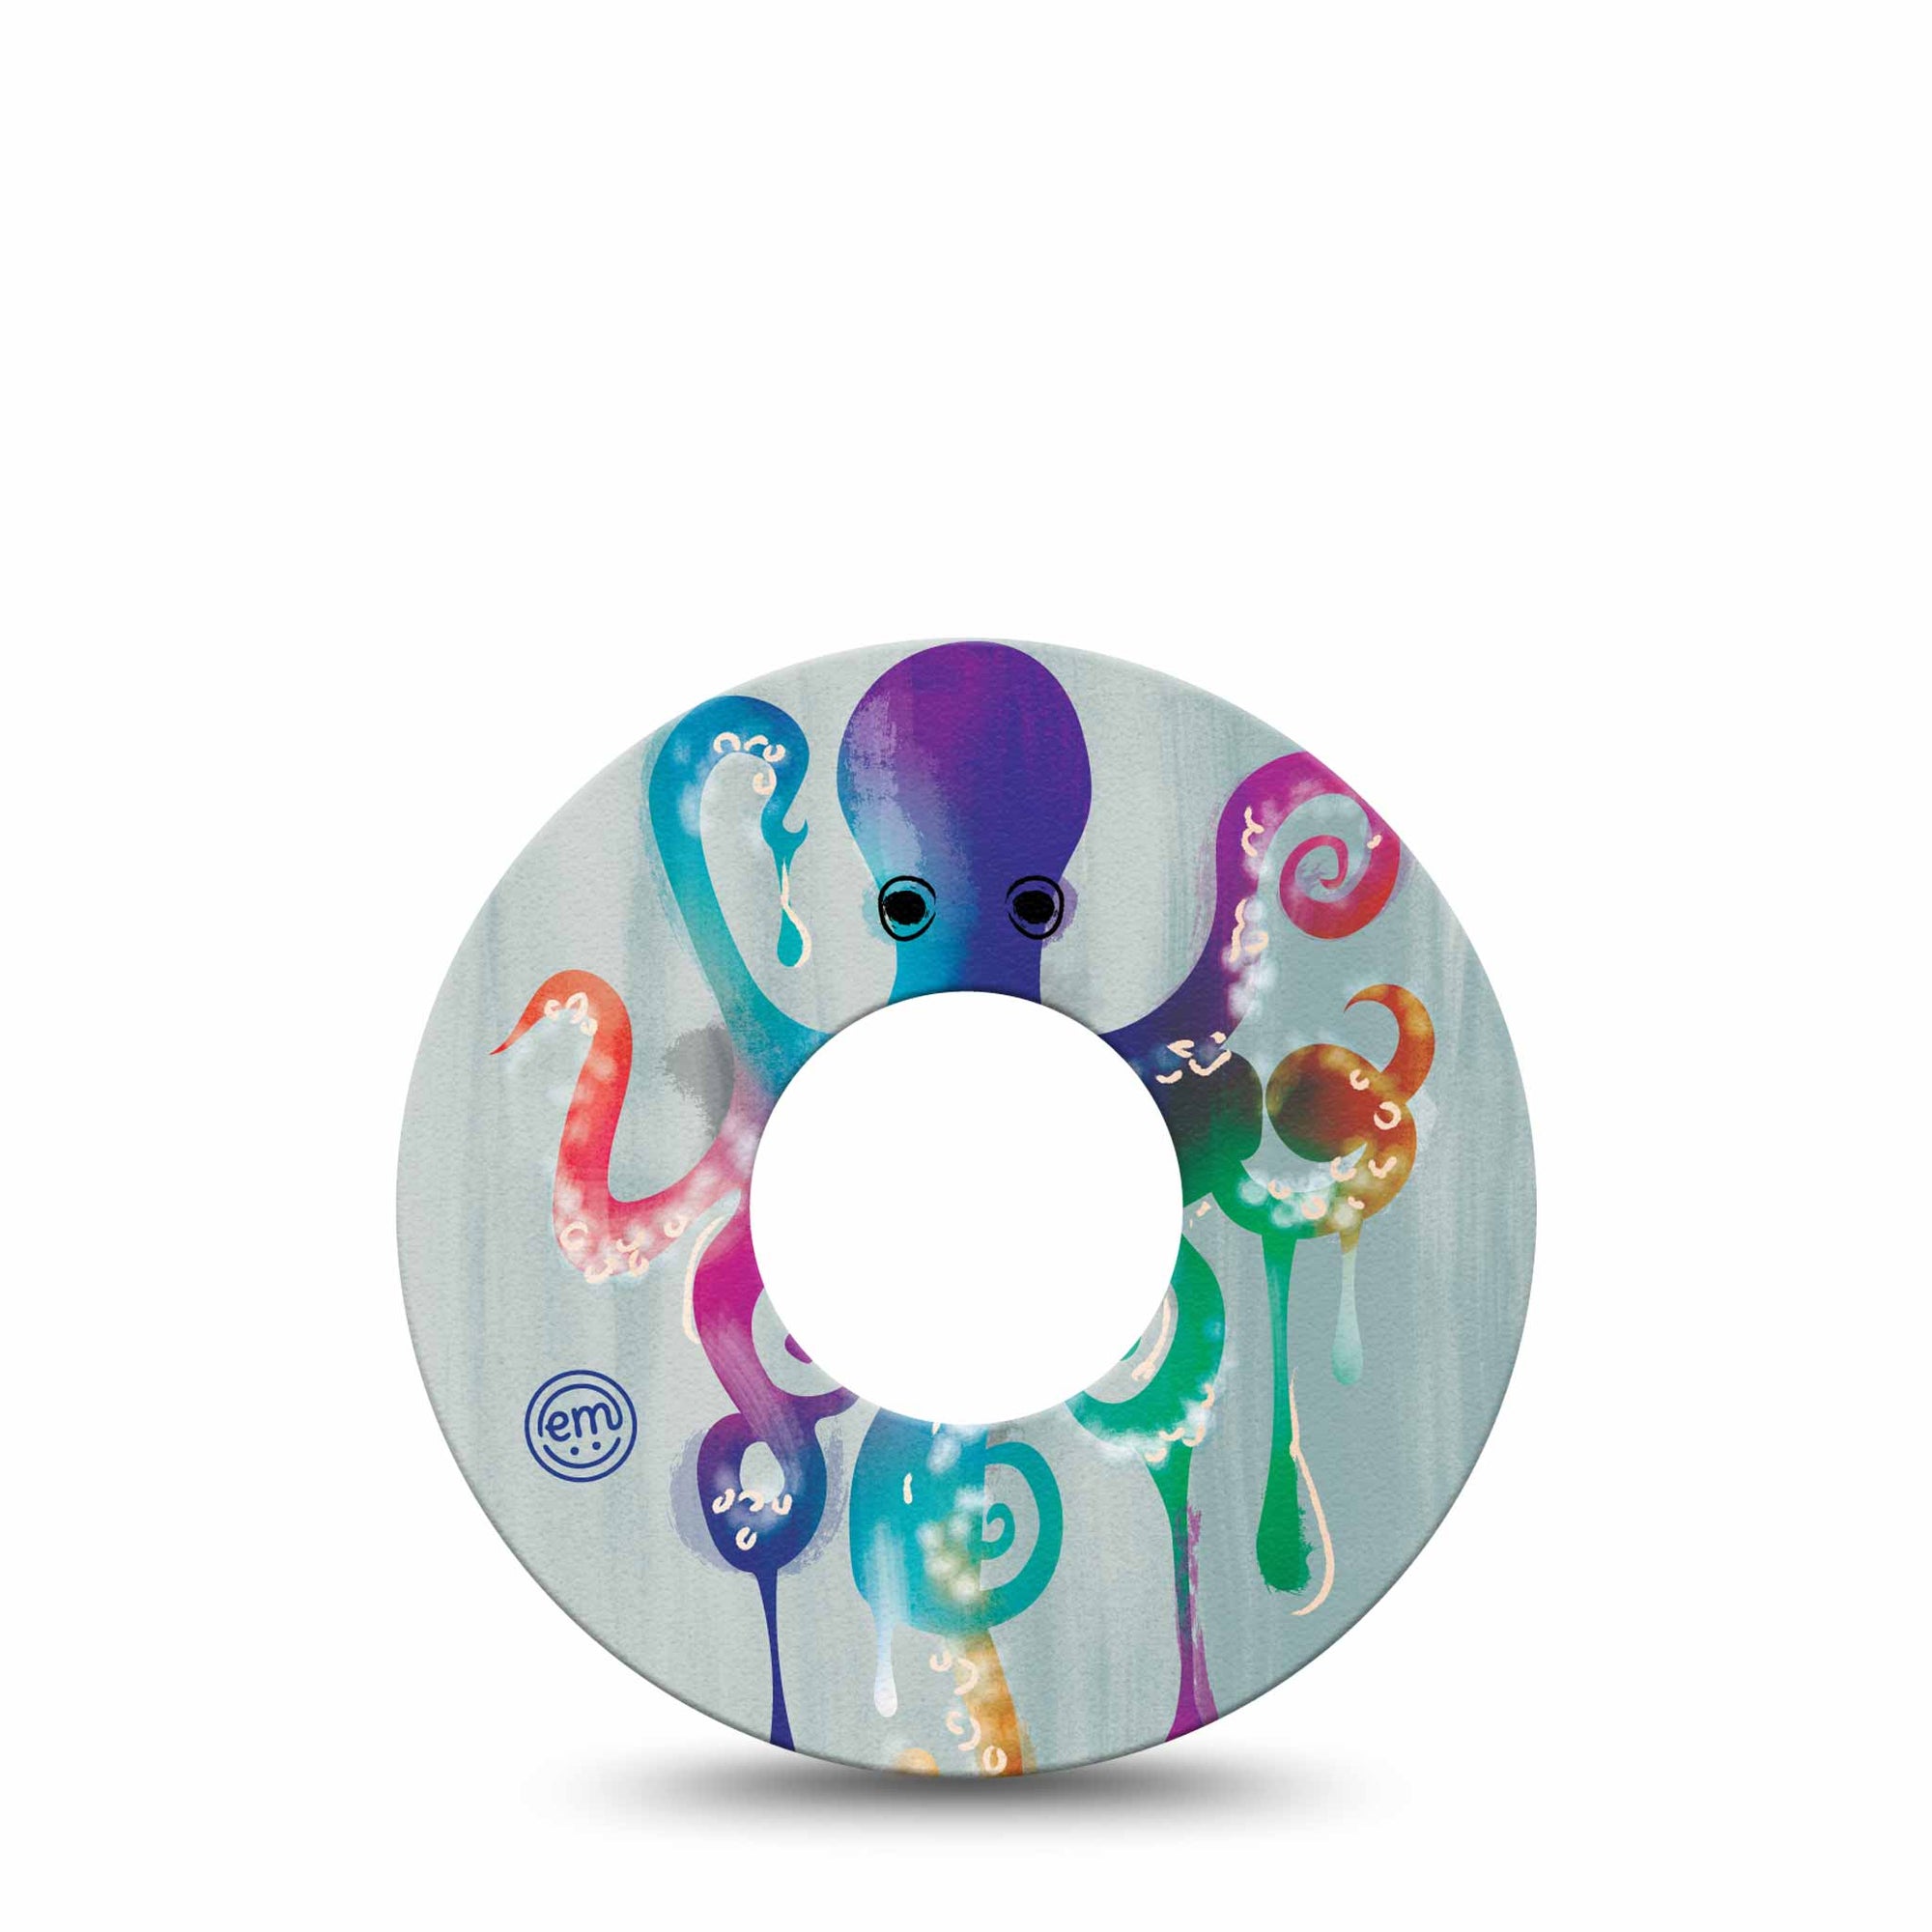 ExpressionMed Octopus Tattoo Infusion Set Tape